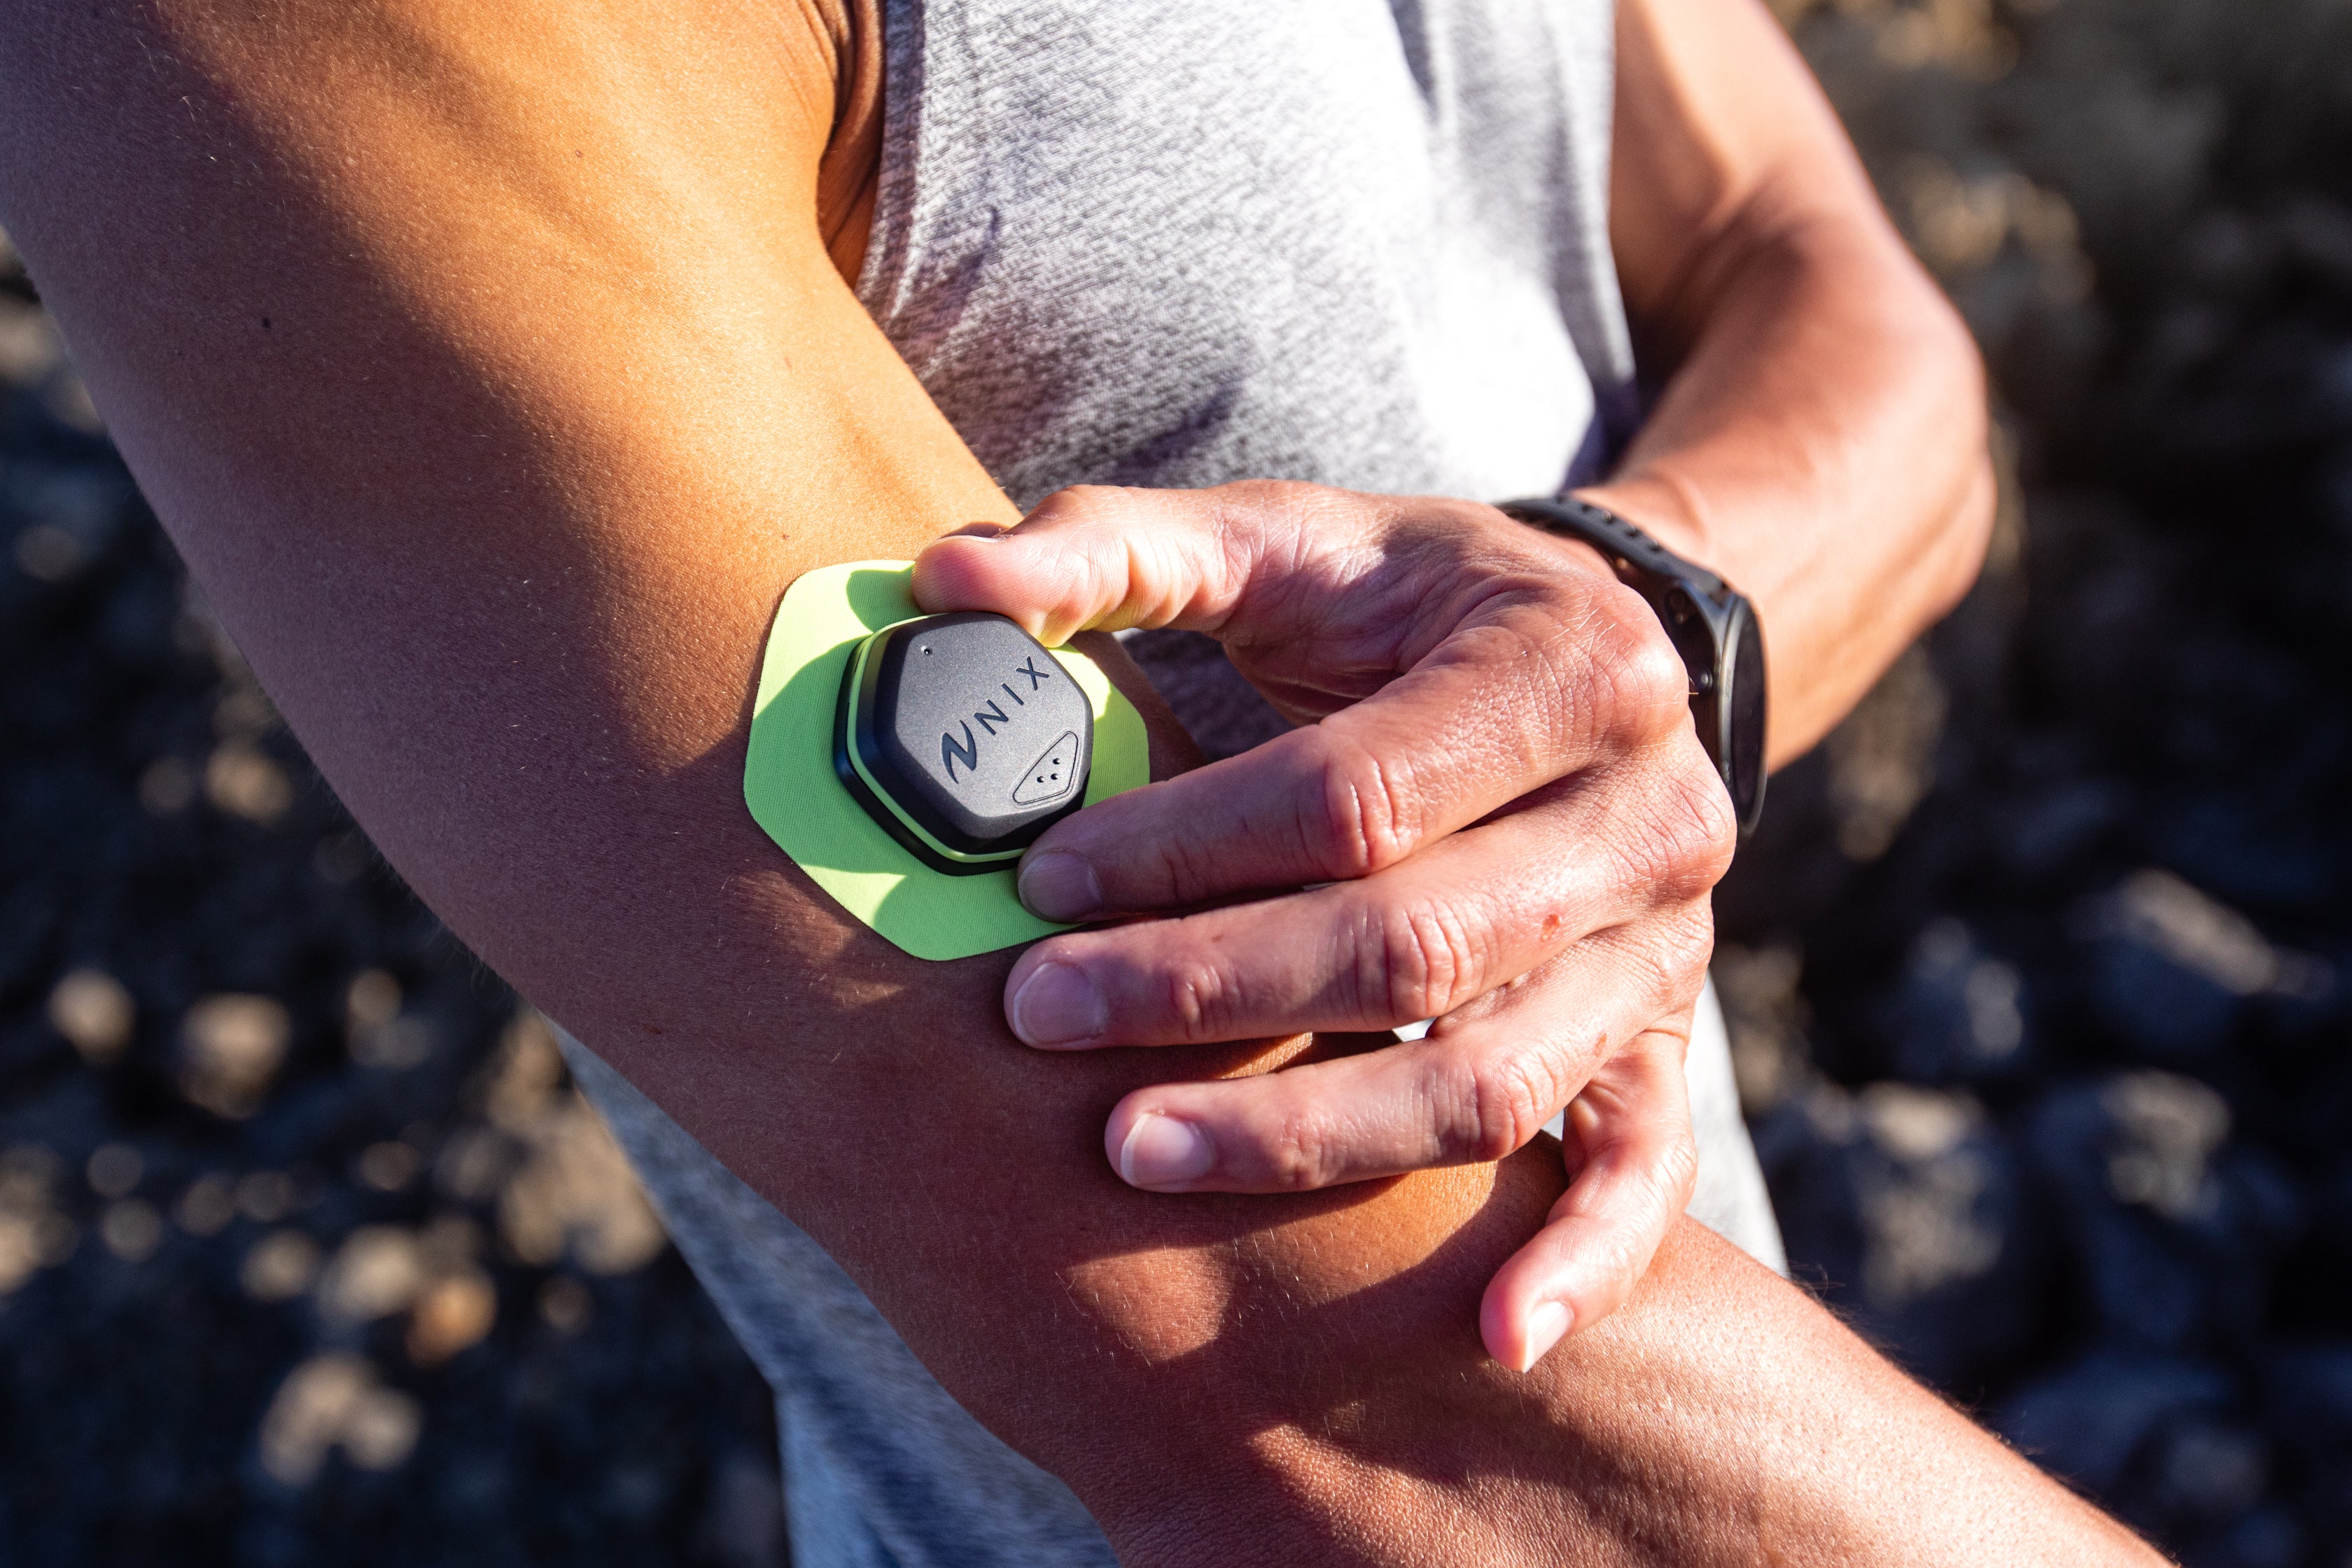 Nix announces a sweat biosensor and app to monitor hydration - Velo